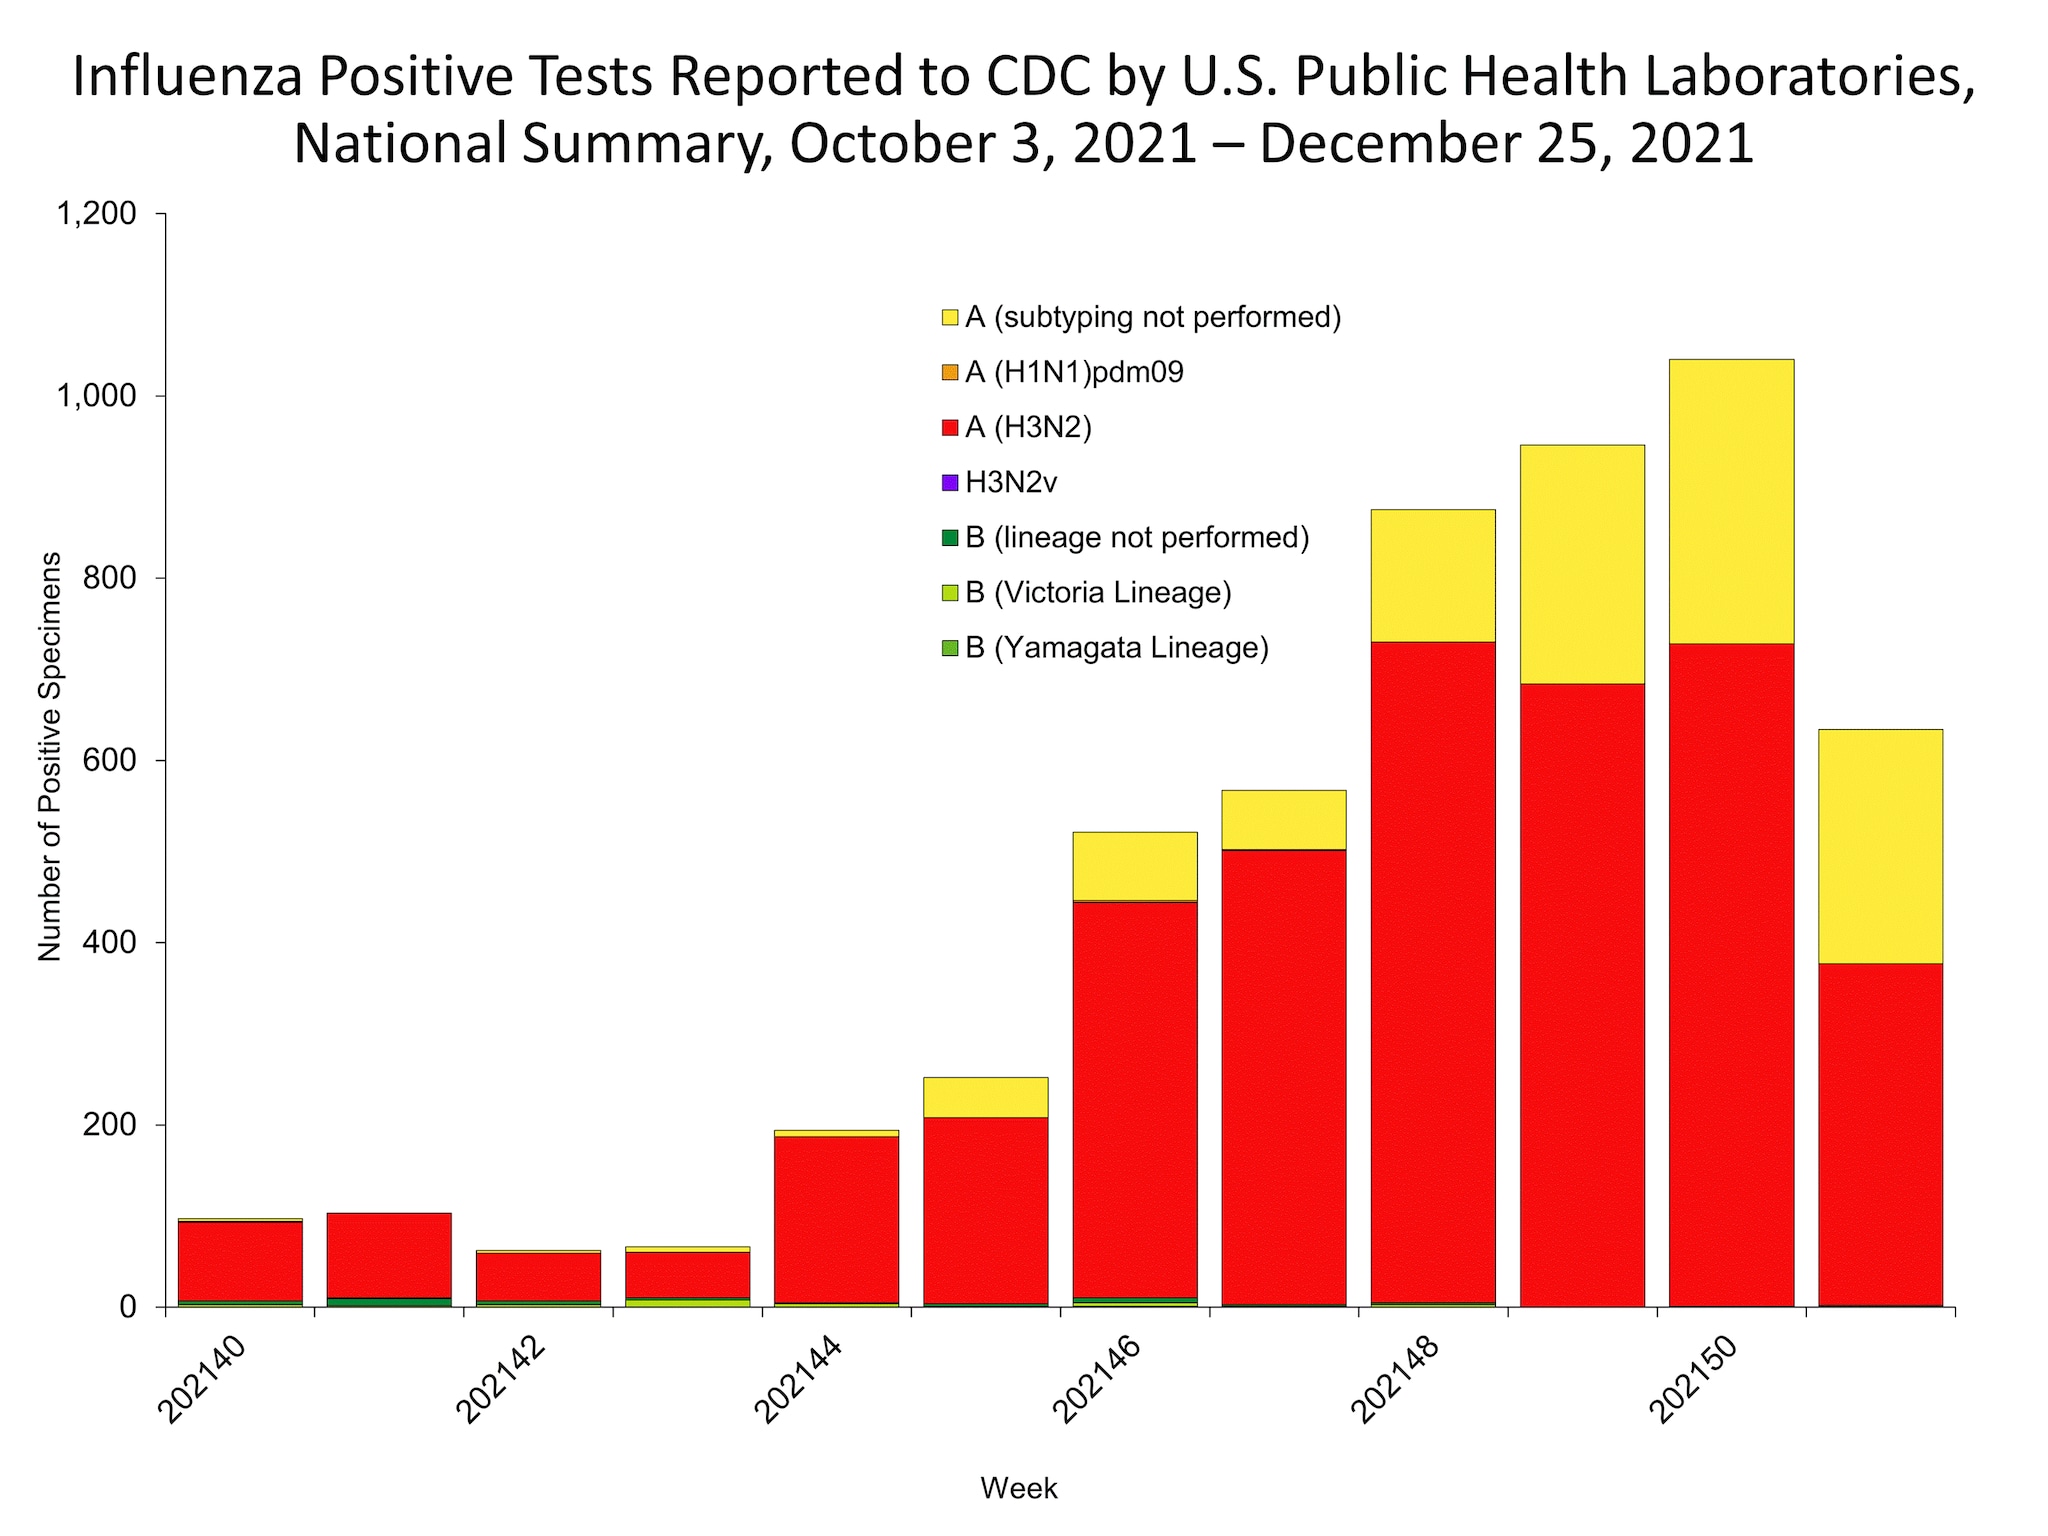 Influenza Positive Tests Reported to CDC by US Public Health Laboratories